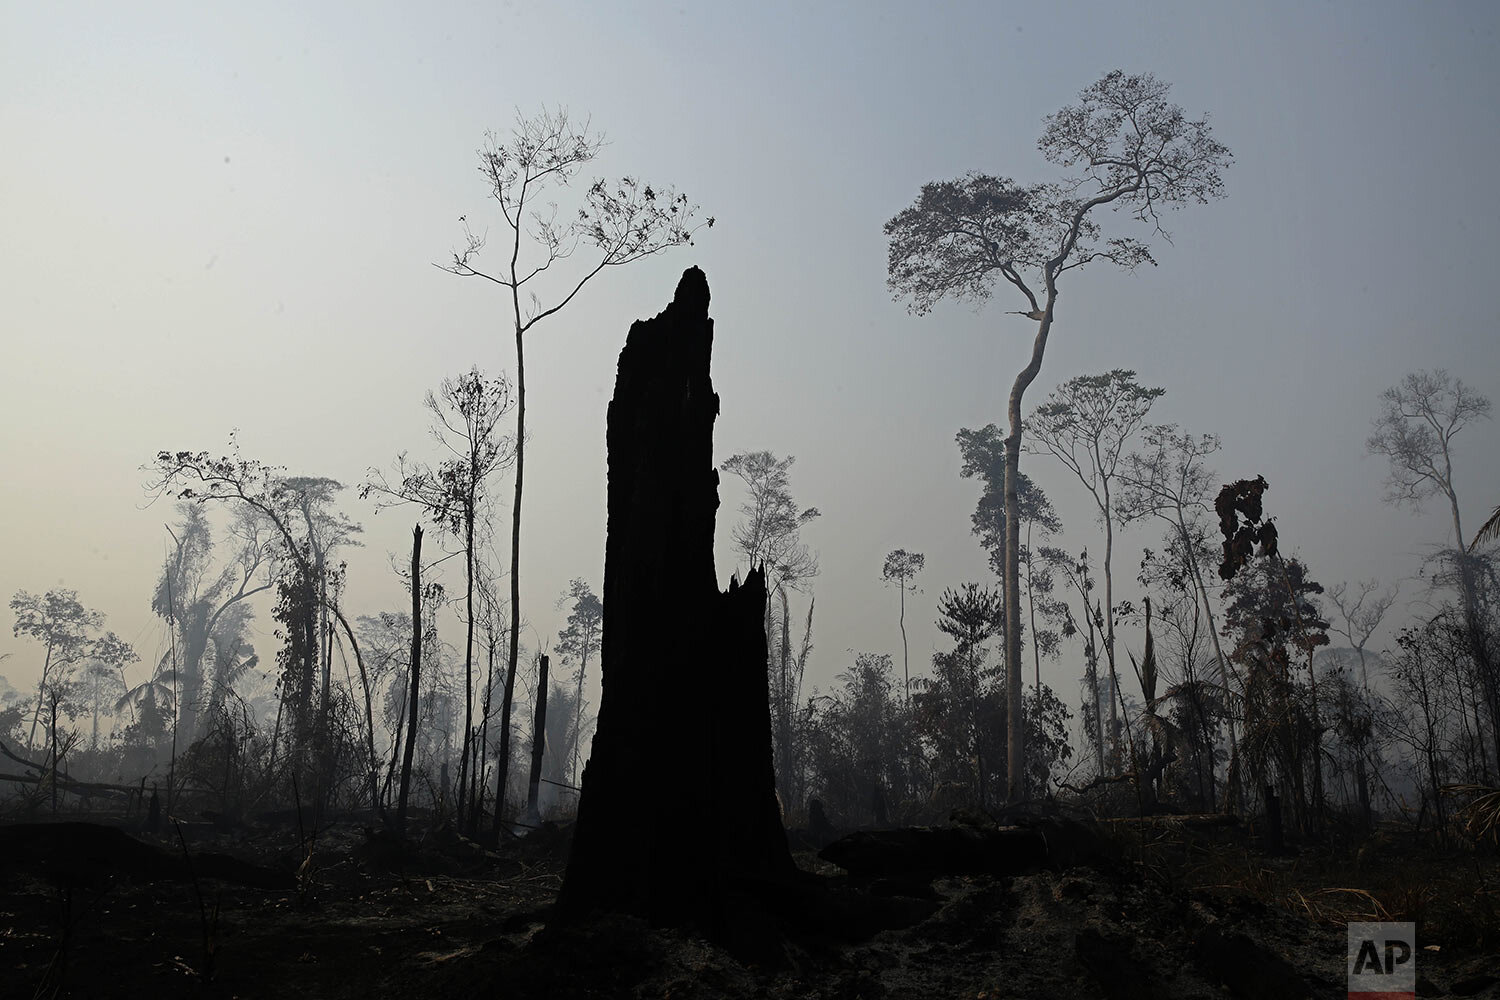  Charred trees stand after a forest fire in the Vila Nova Samuel region, along the road to the Jacunda National Forest near the city of Porto Velho, Rondonia state, part of Brazil's Amazon, Aug. 25, 2019. Leaders of the Group of Seven nations said Su